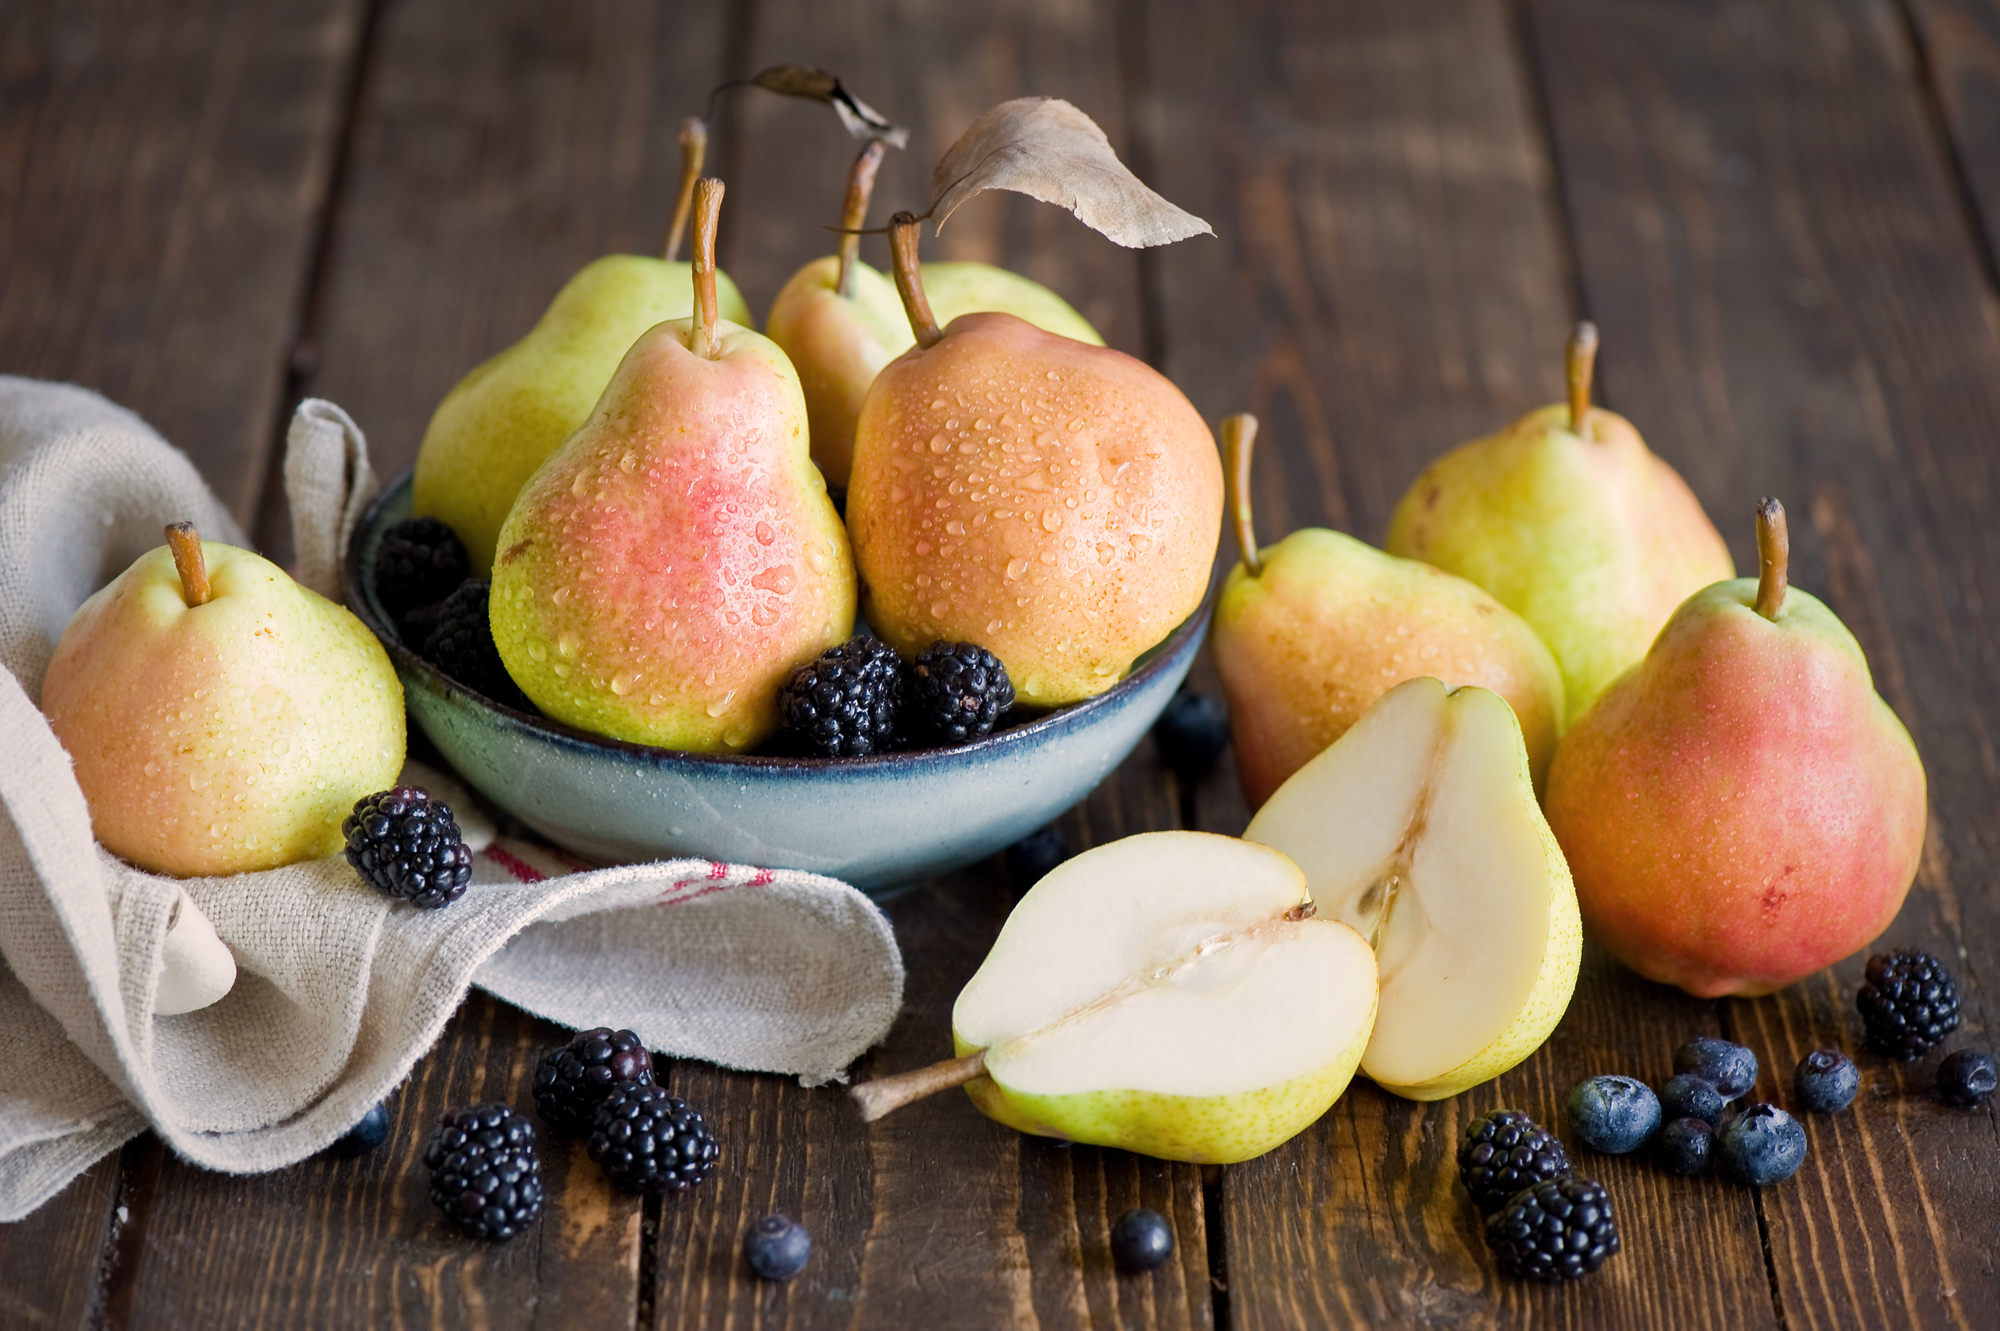 151073 download wallpaper fruits, food, pears, berries, blackberry screensavers and pictures for free